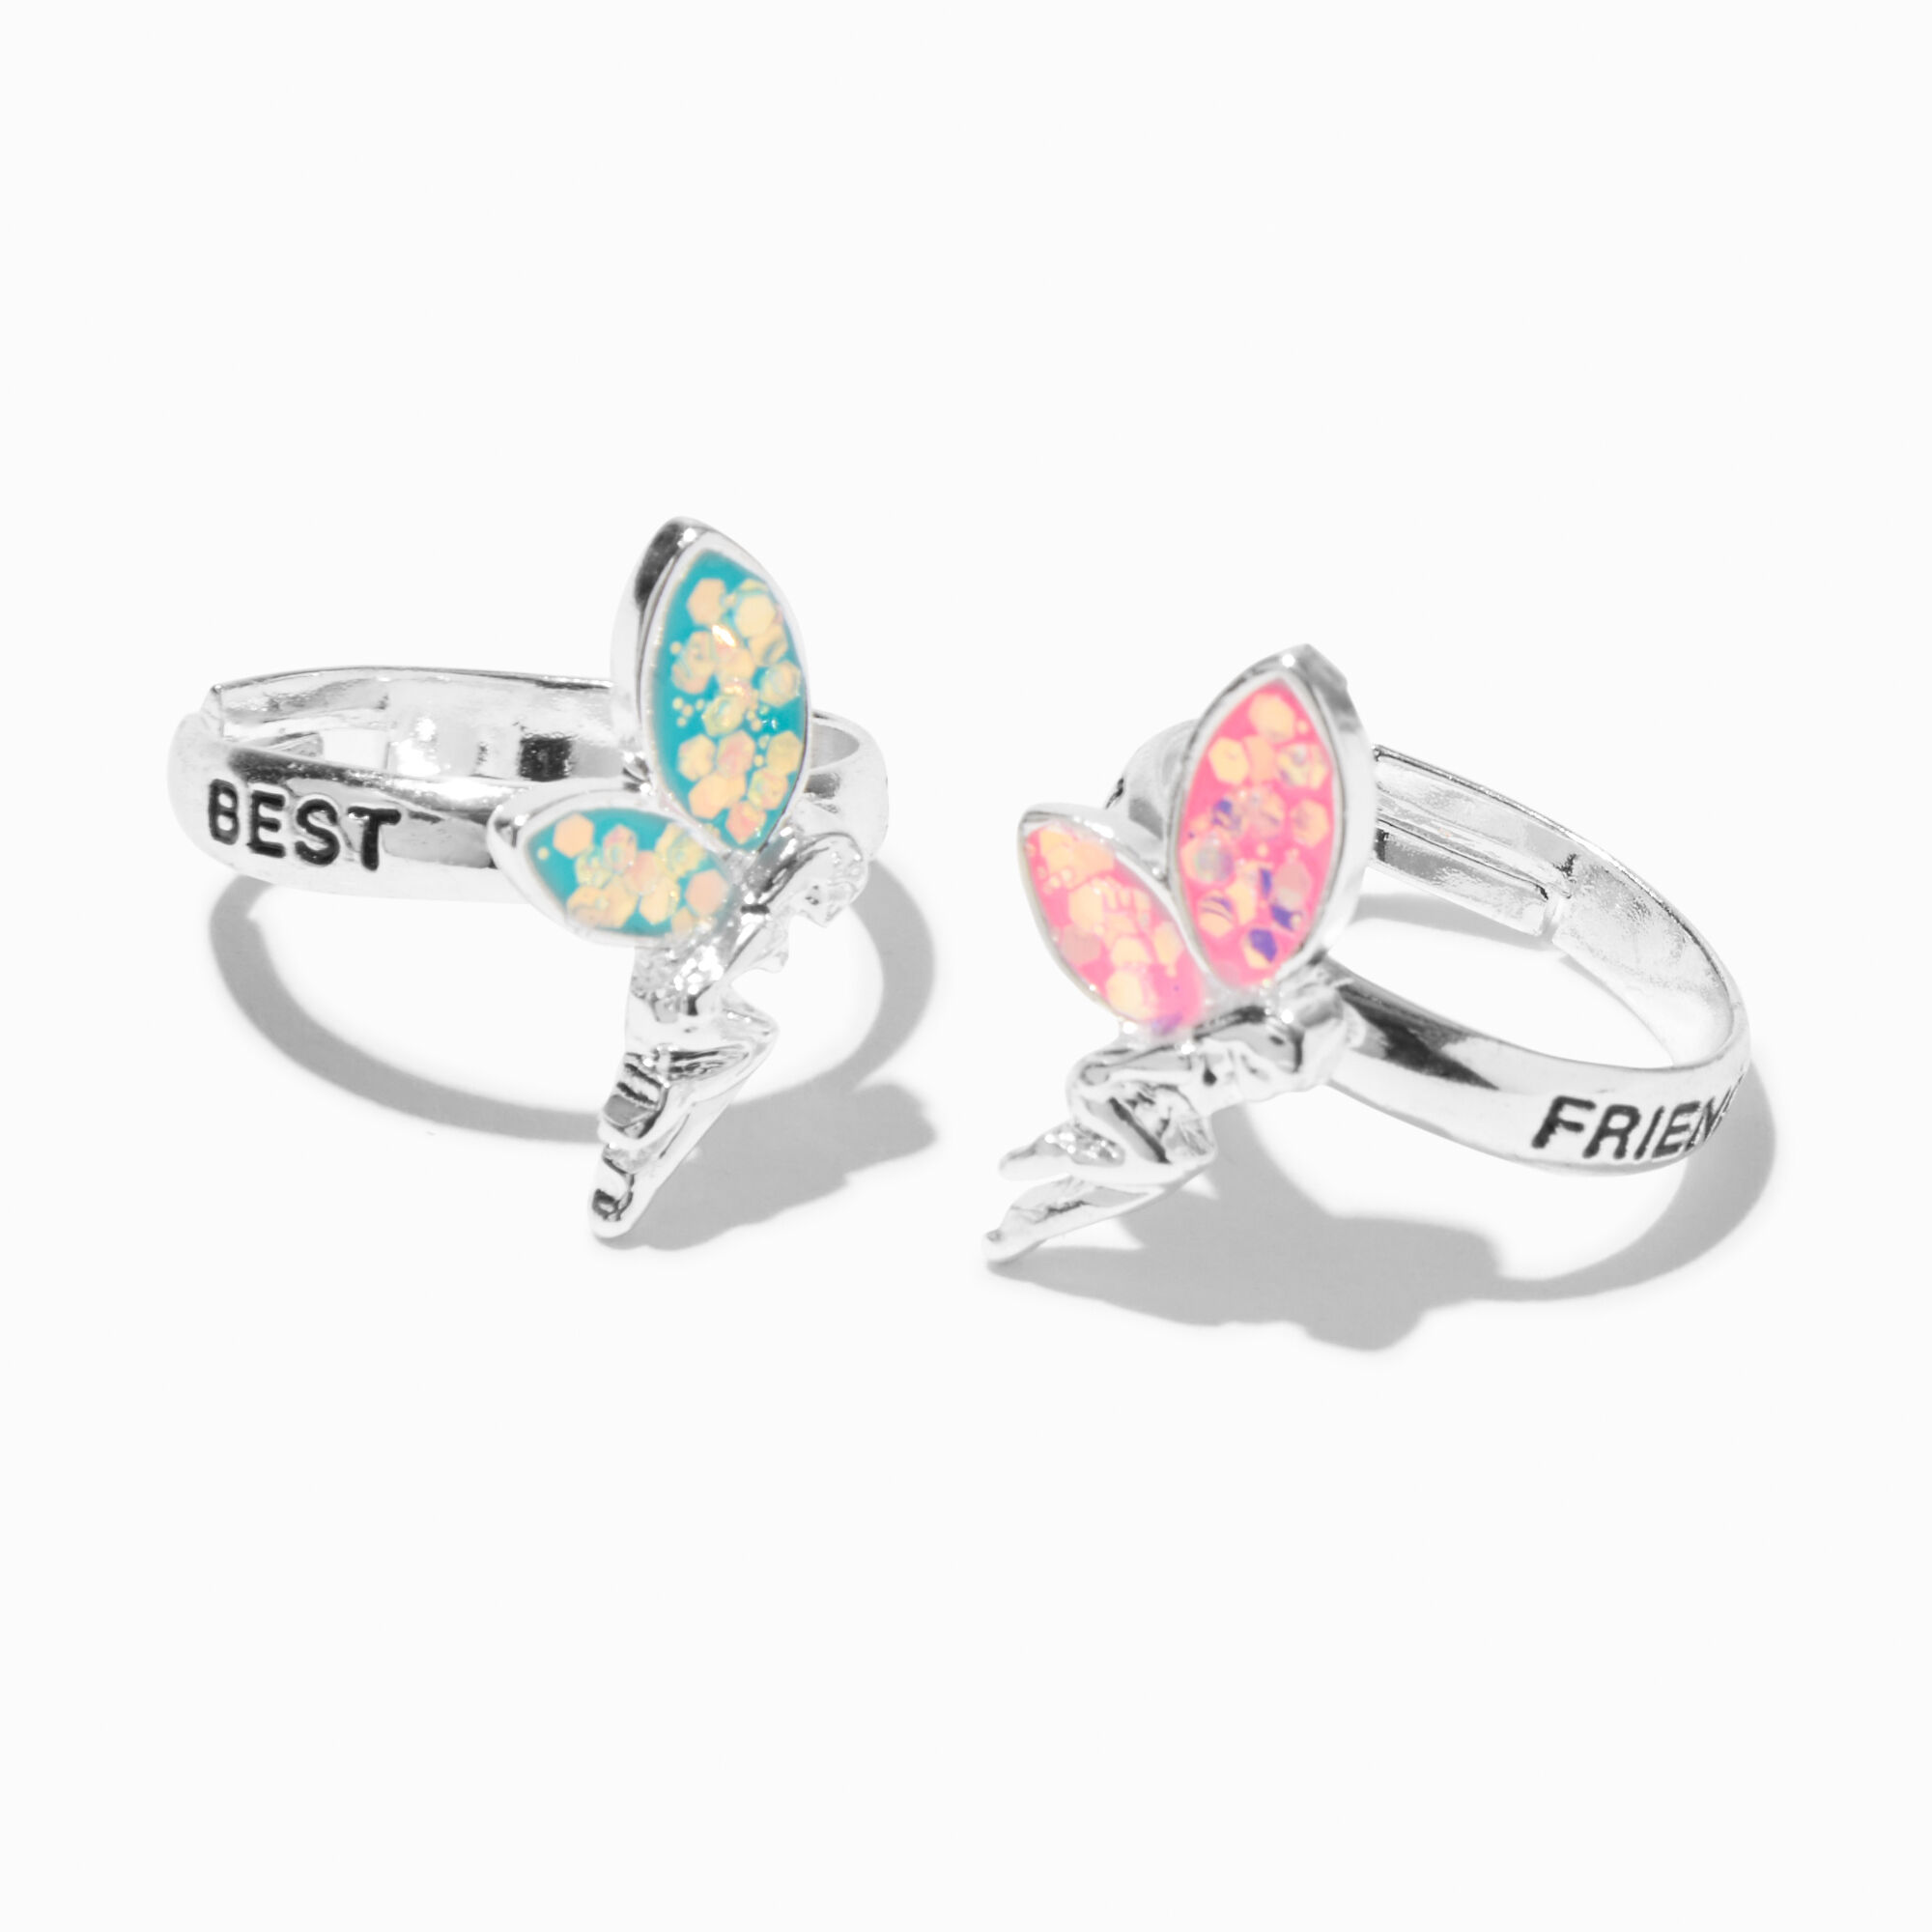 Creative Butterfly Butterfly Ring Set For Couples Perfect For Friendship,  Engagement, Wedding Gold And Silver Colors Available From Bestwishtoyou920,  $0.75 | DHgate.Com